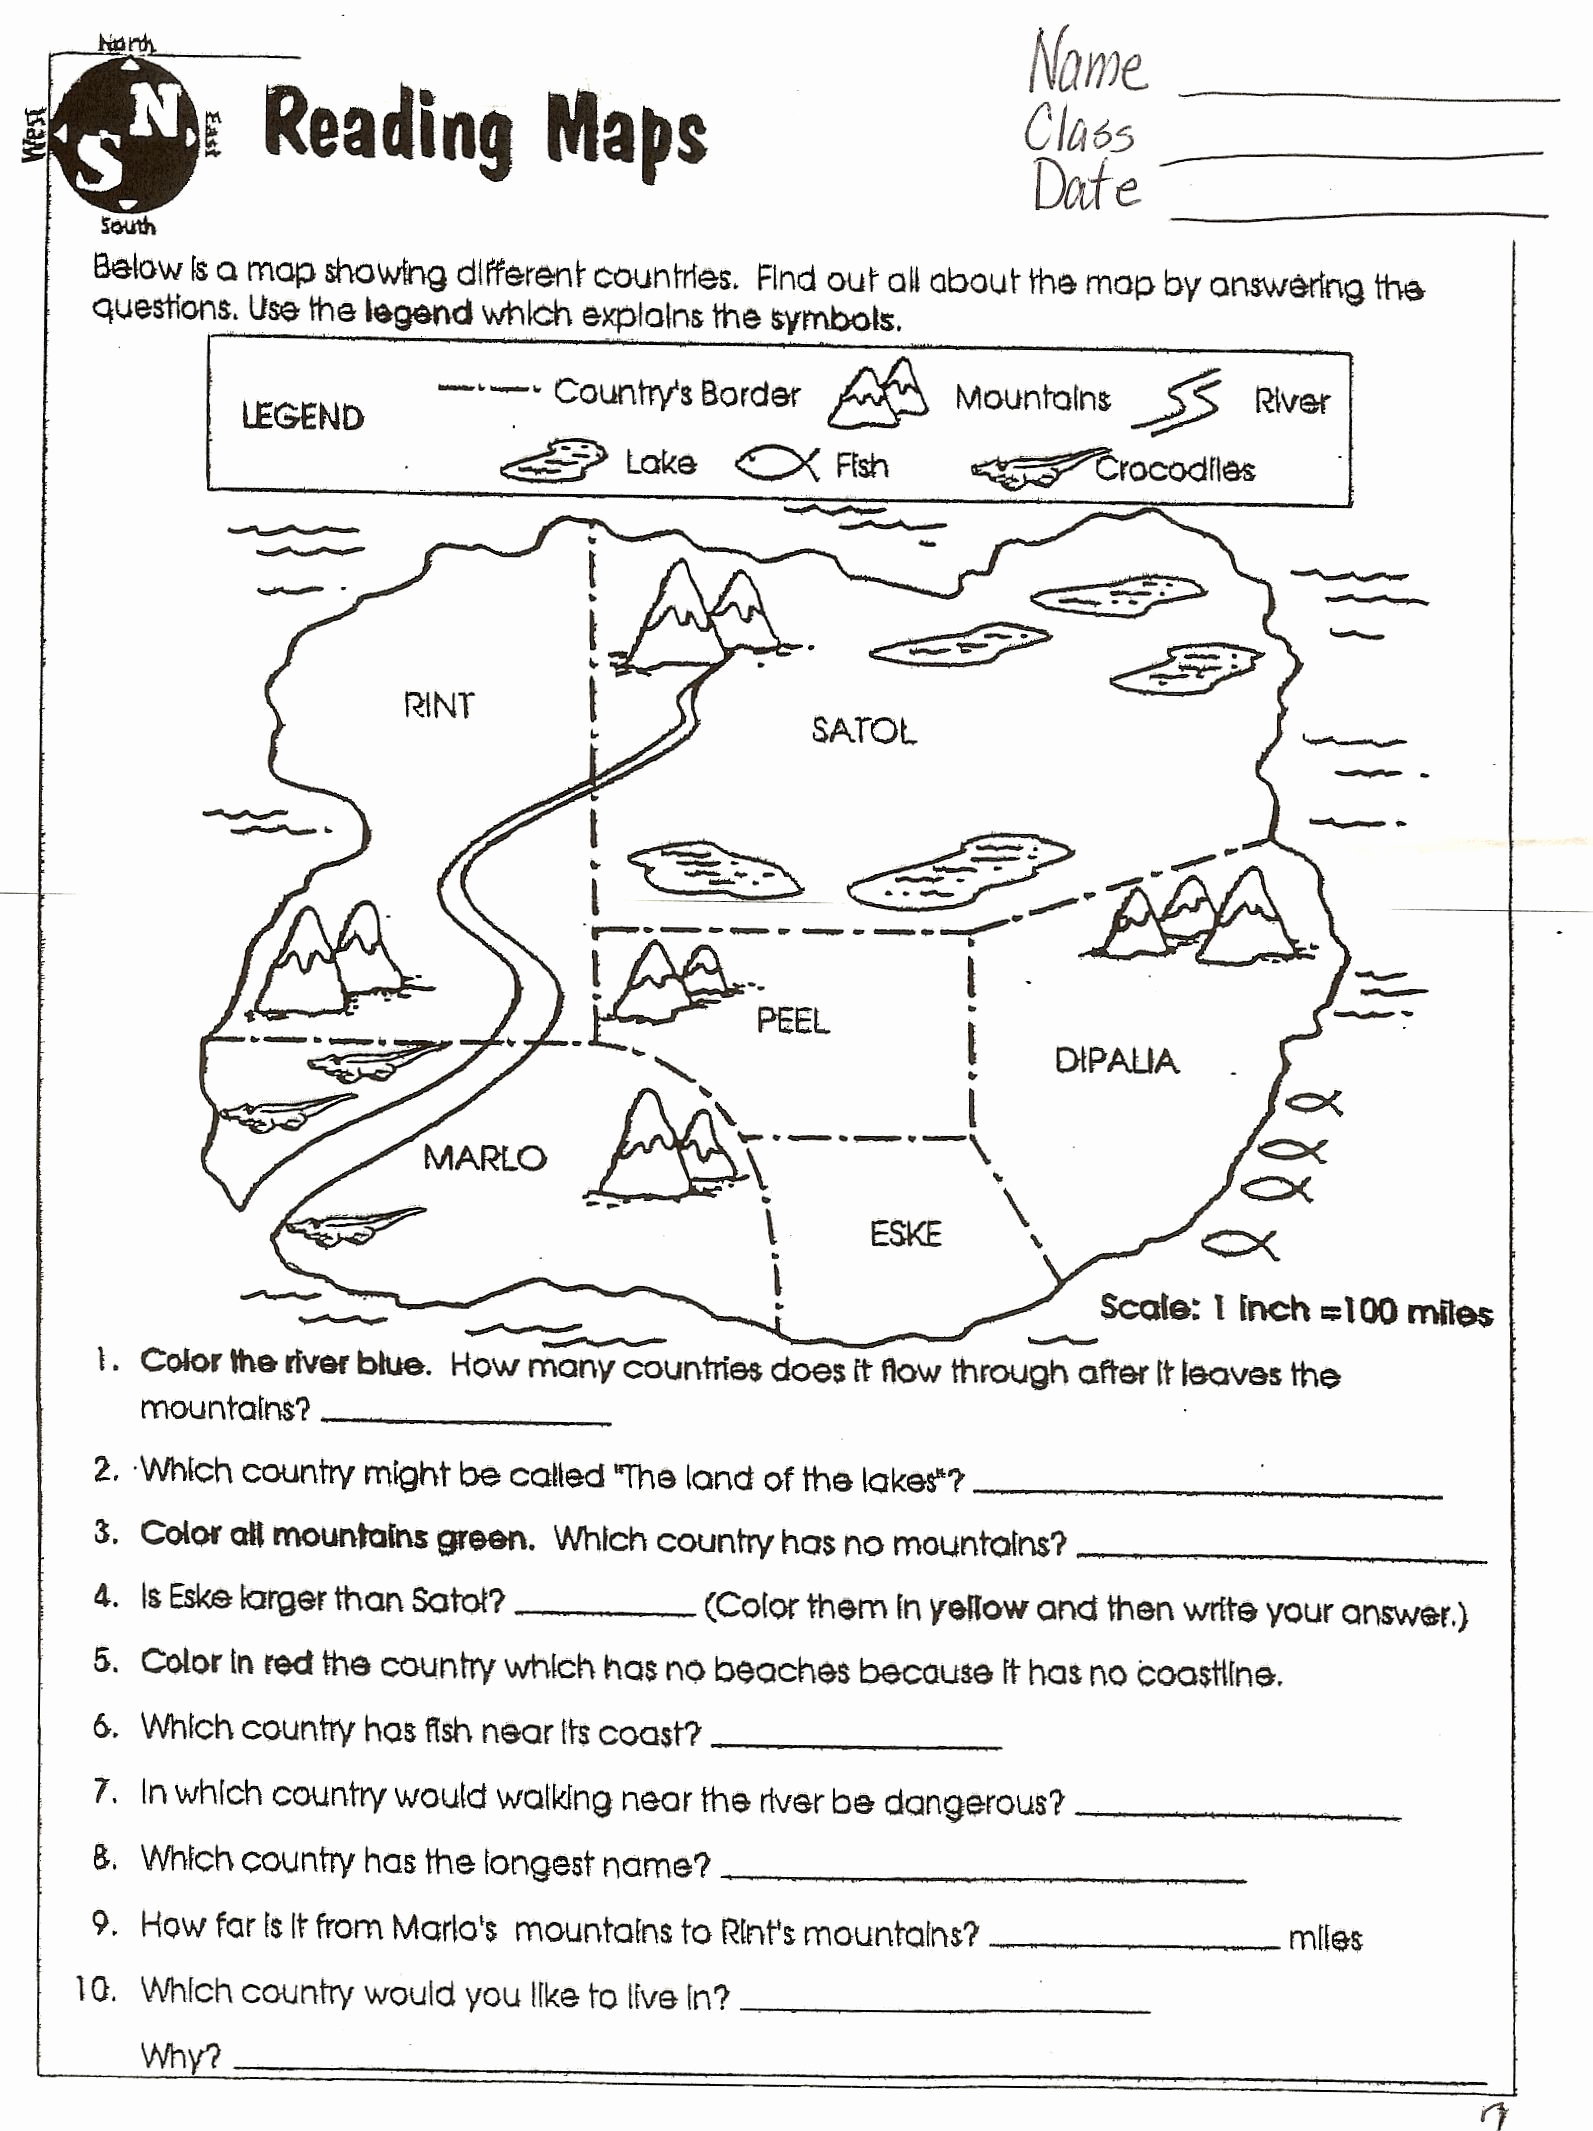 Computer Worksheets for Middle School Beautiful 20 Technology Worksheets for Middle School